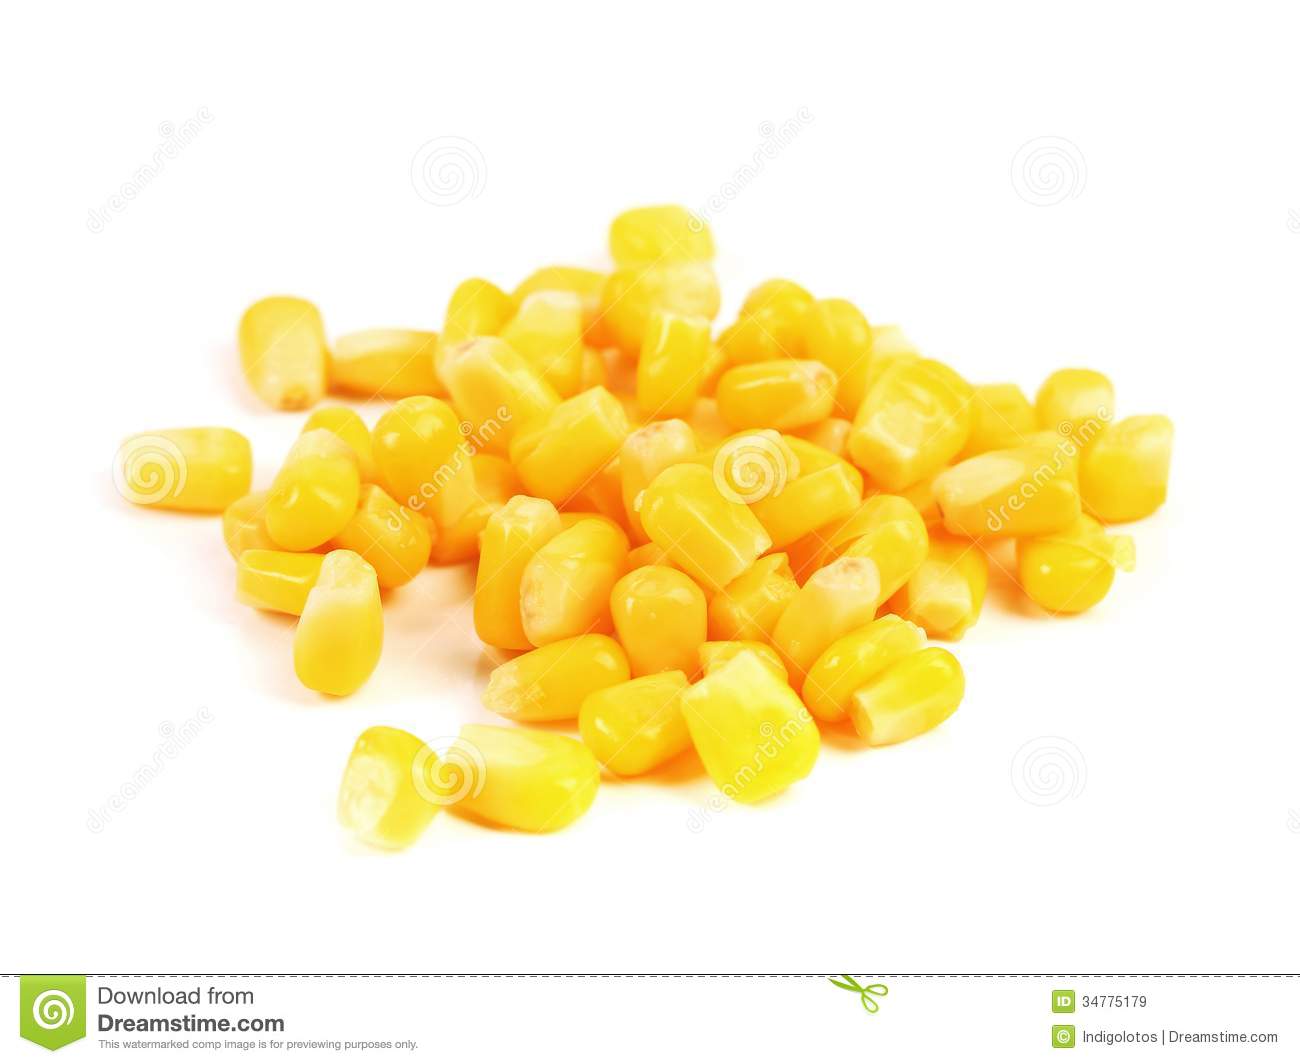 Some Corn Kernels Royalty Free Stock Images   Image  34775179